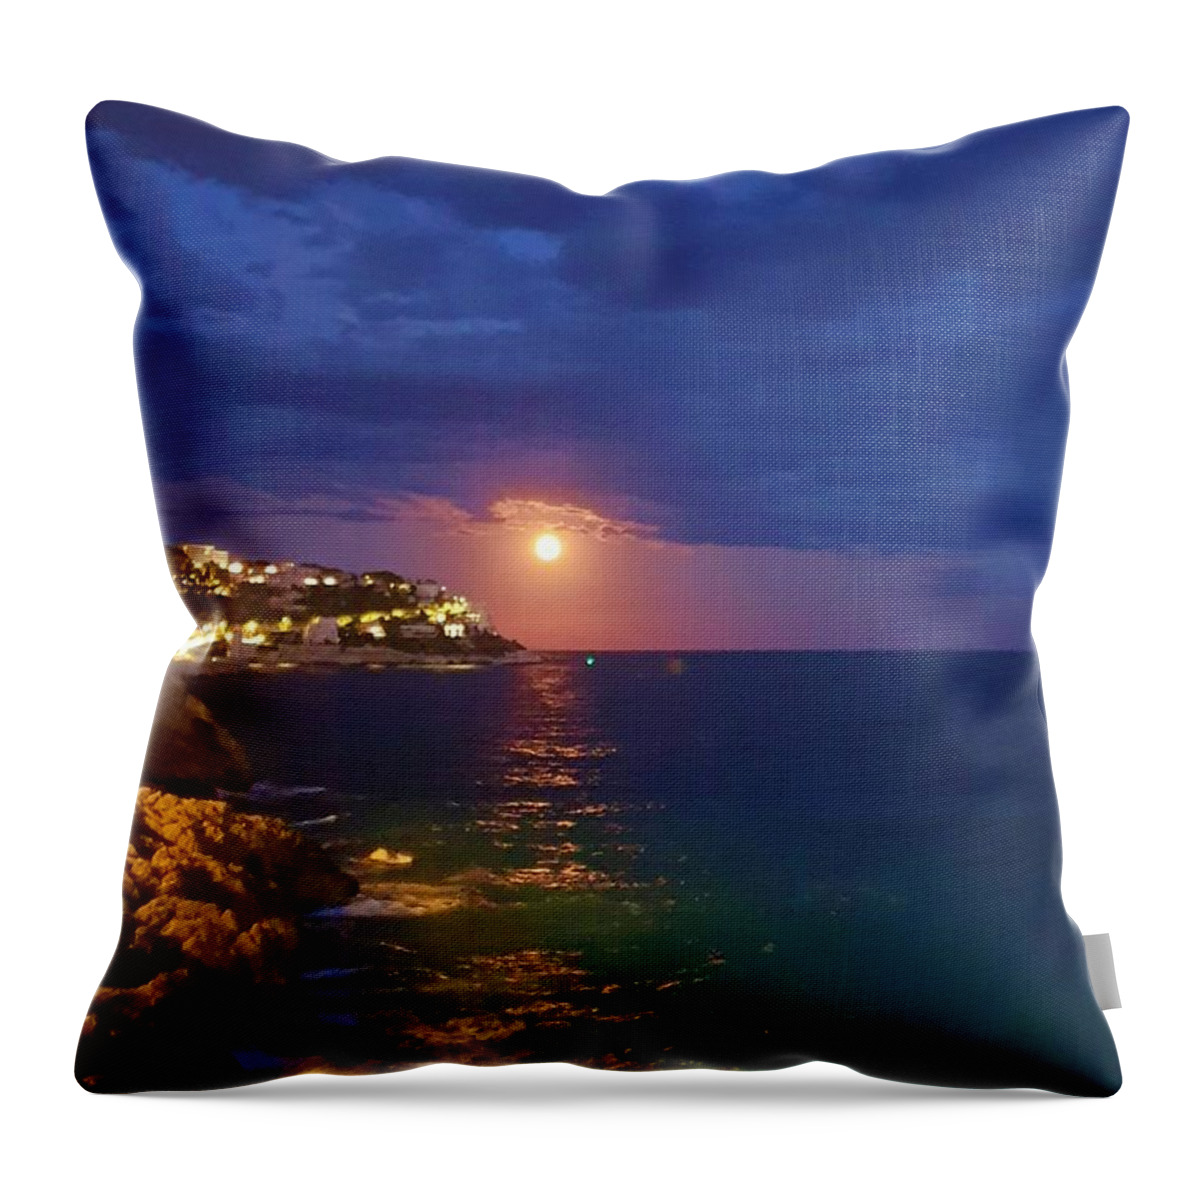 Moonrise Throw Pillow featuring the photograph Moondance by Andrea Whitaker